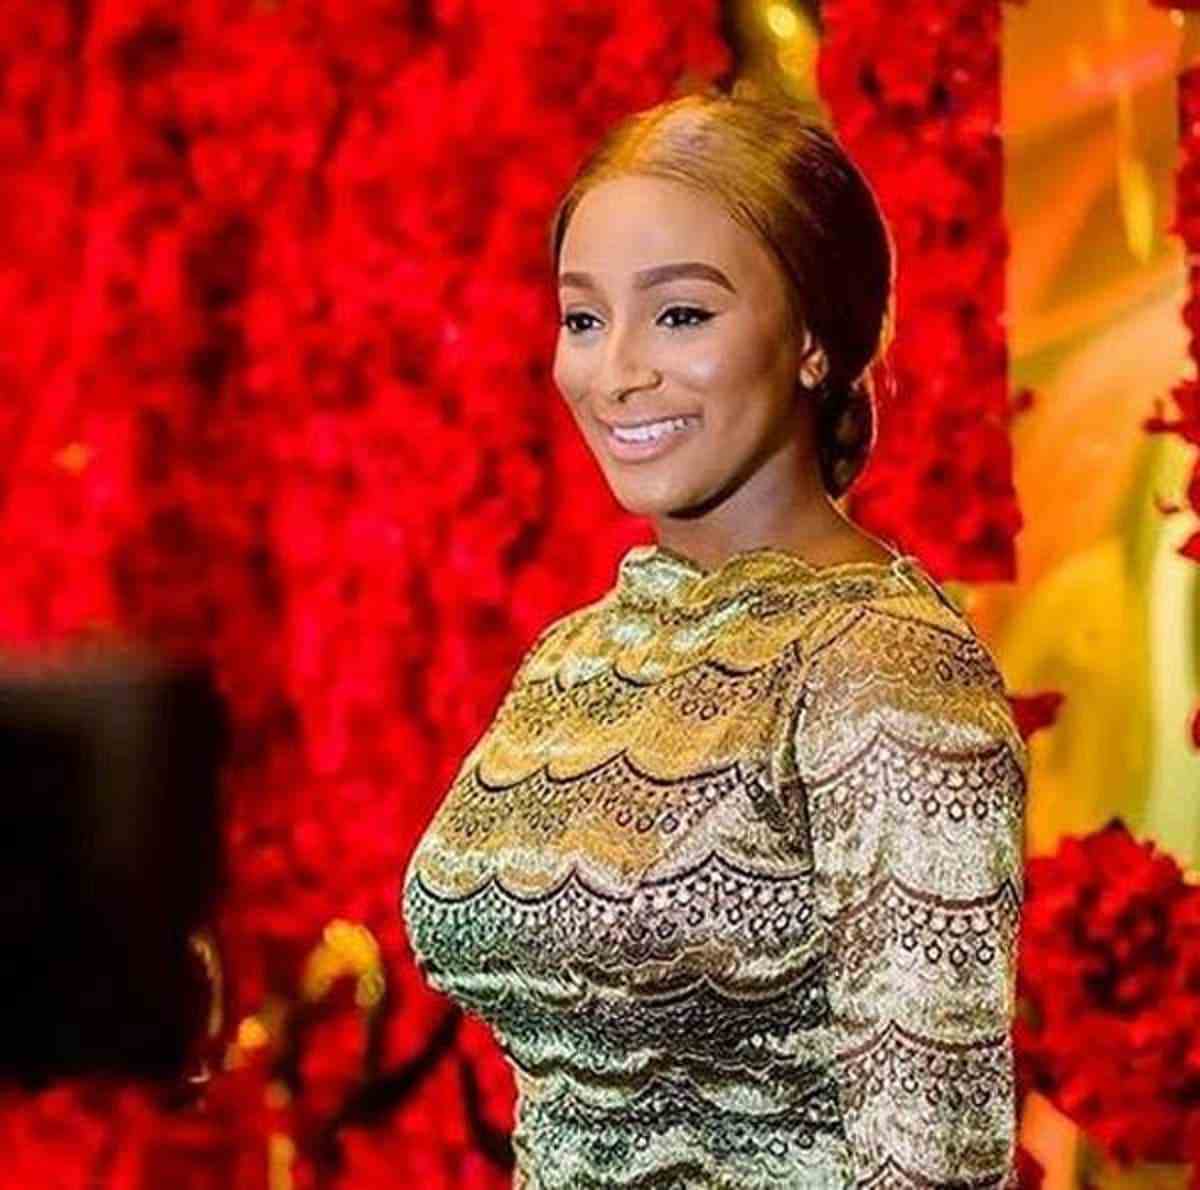 "My parents will k*ll me if I join #BussItChallenge" - DJ Cuppy